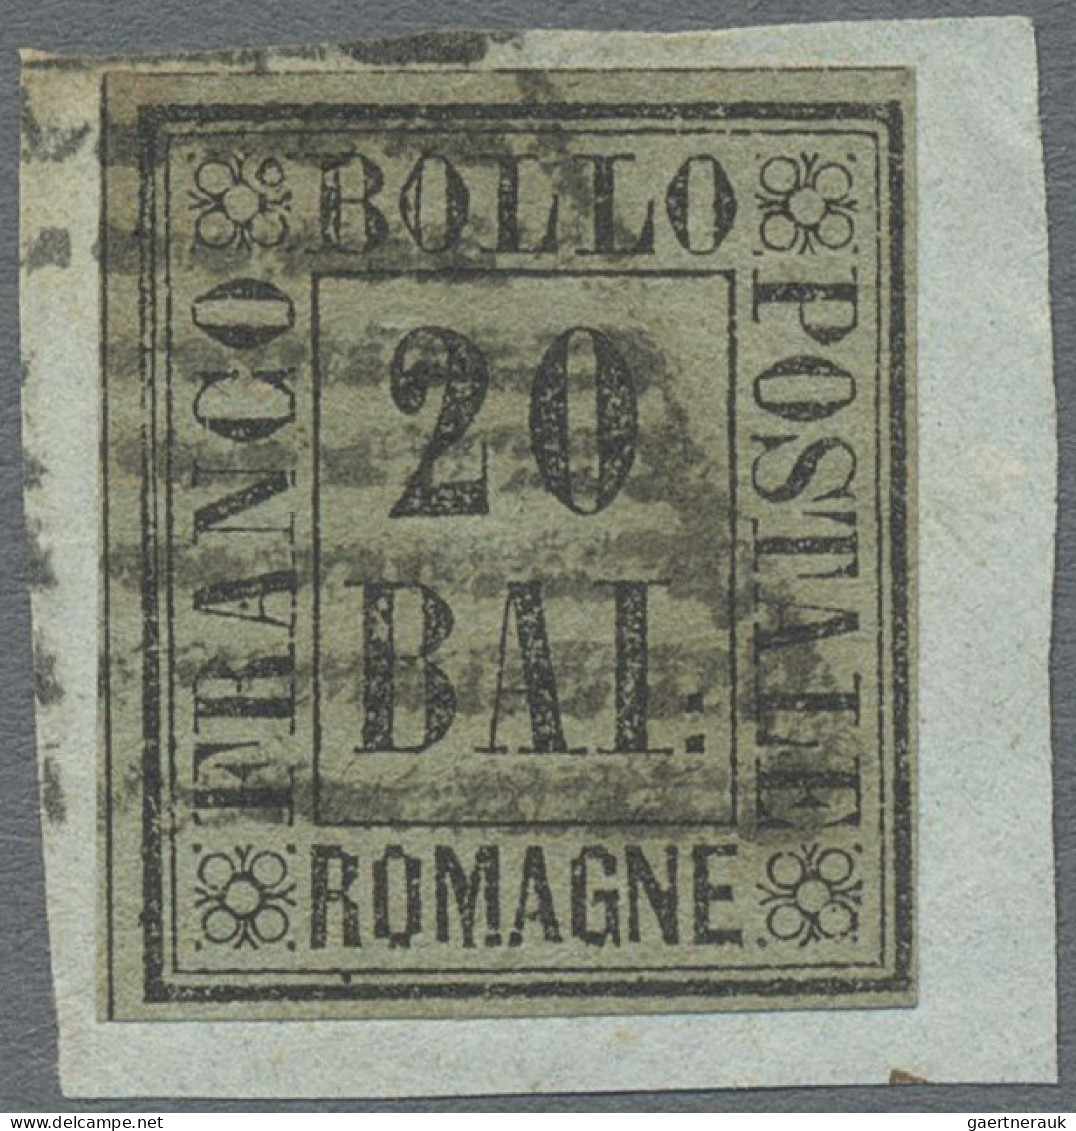 Old Italian States: Romagna: 1859, 20 Baj. Grey Green, Tied By Mute Papal Grill - Romagna